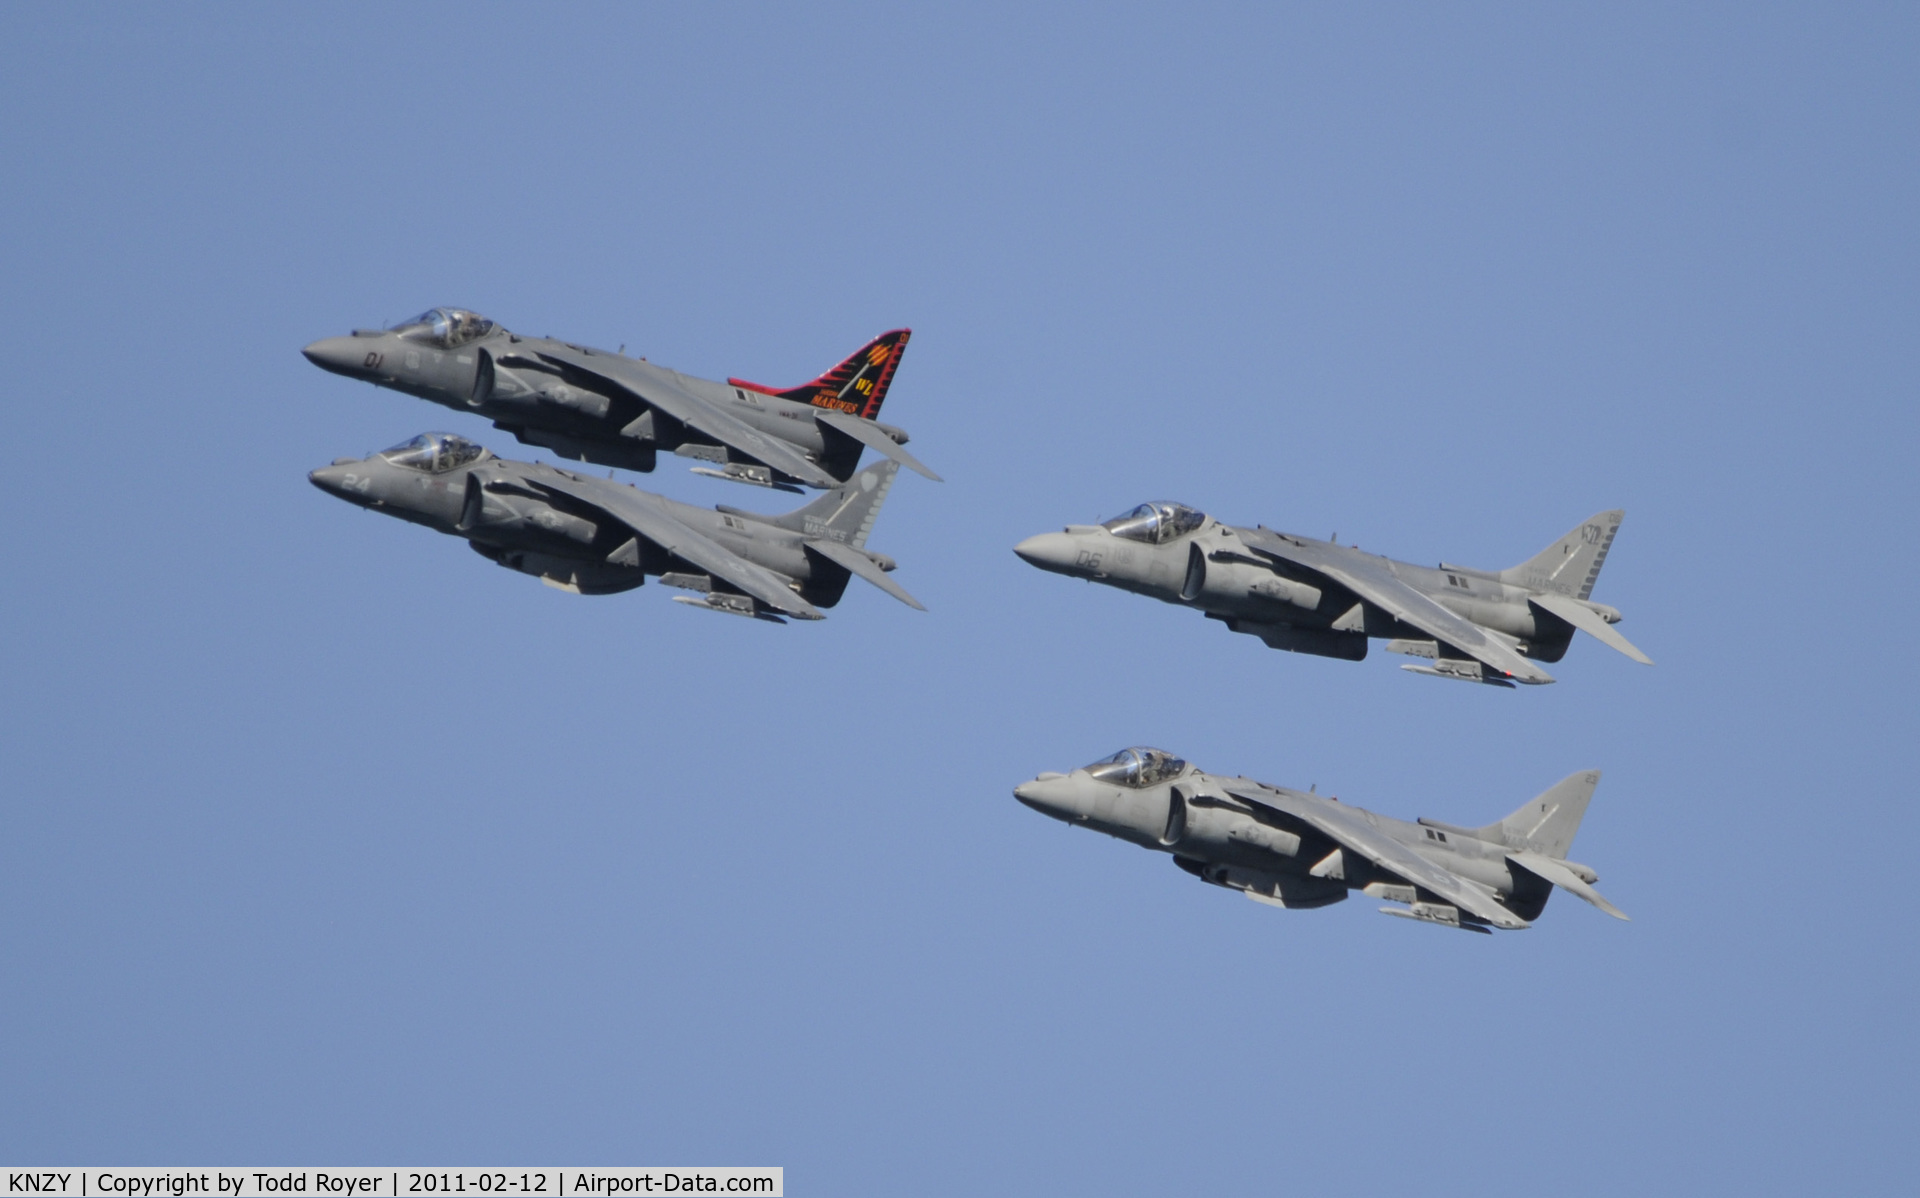 North Island Nas /halsey Field/ Airport (NZY) - Flight of four Harriers